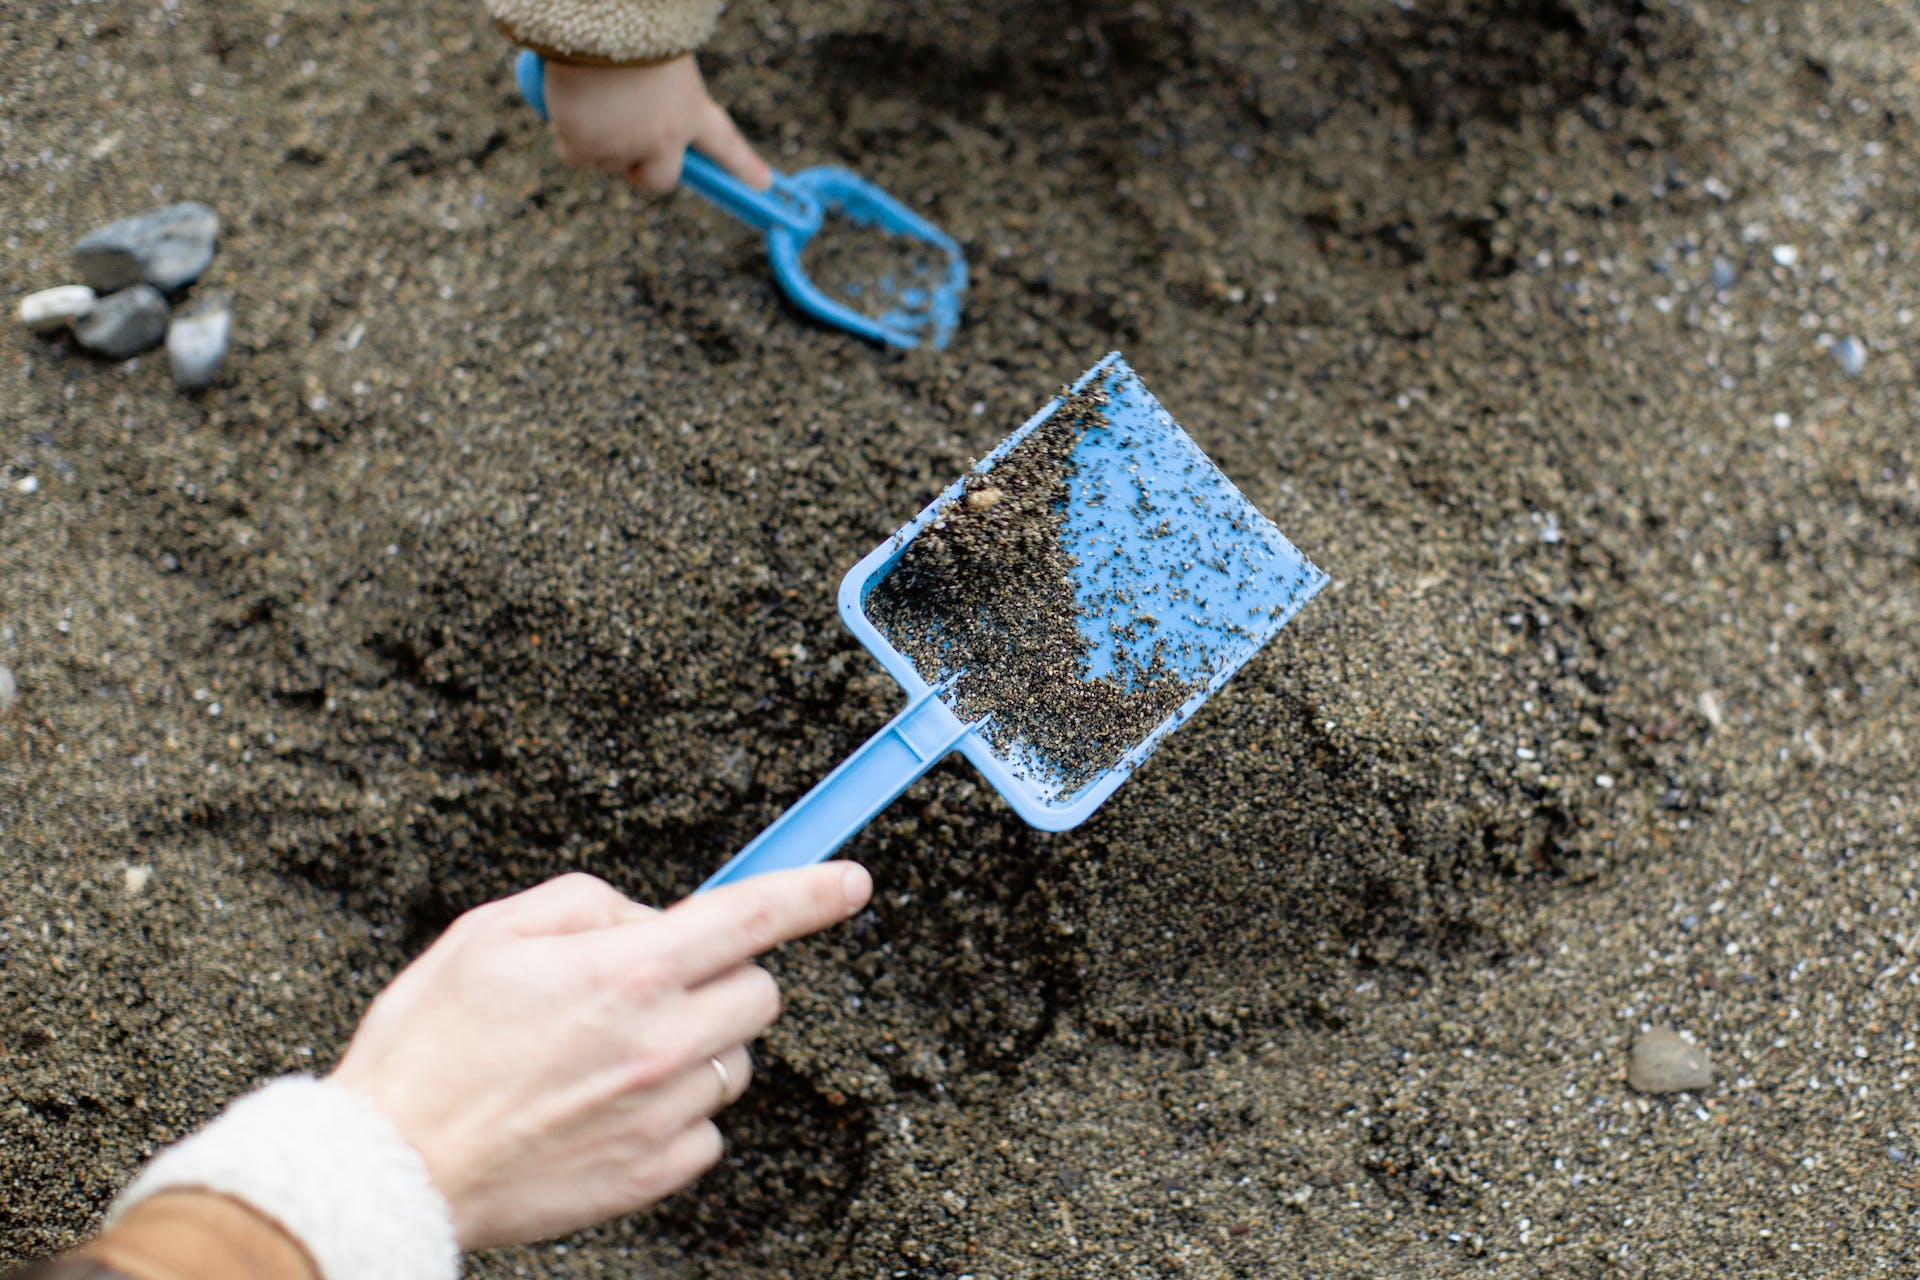 A person and a child holding shovels in sand | Source: Pexels